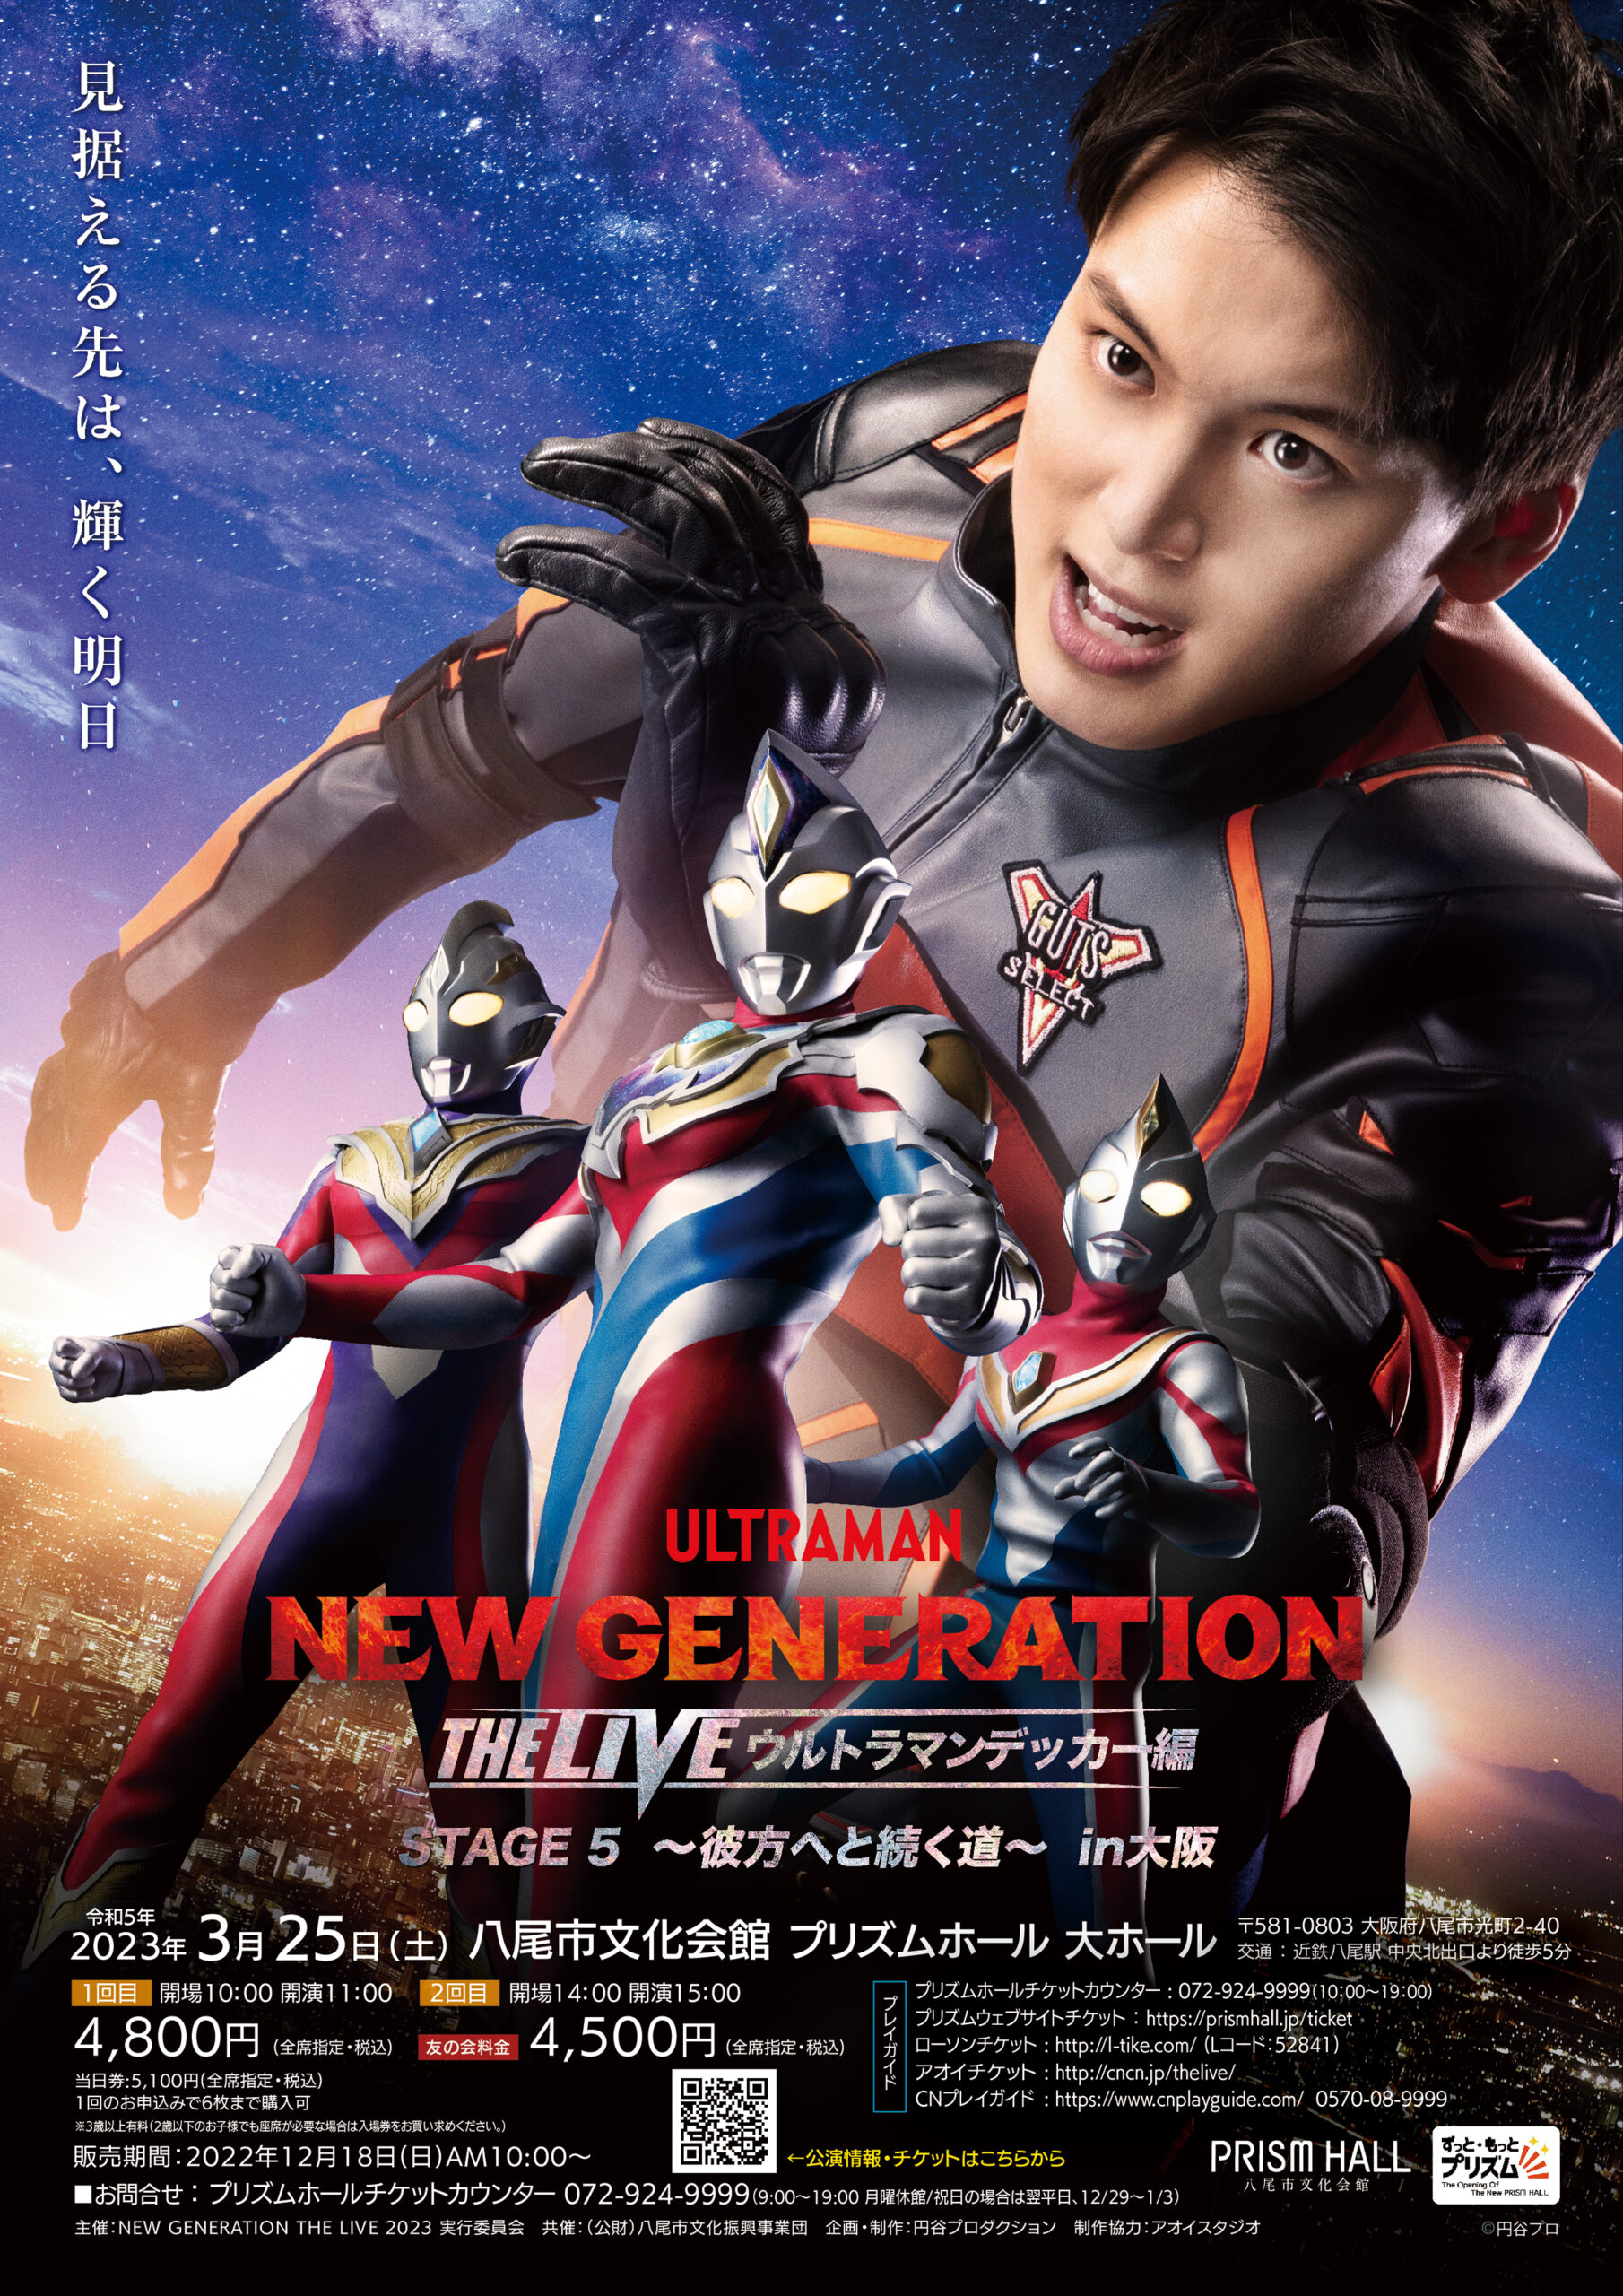 ULTRAMAN NEW GENERATION THE LIVE ウルトラマンデッカー編 STAGE5 in 大阪チラシ表